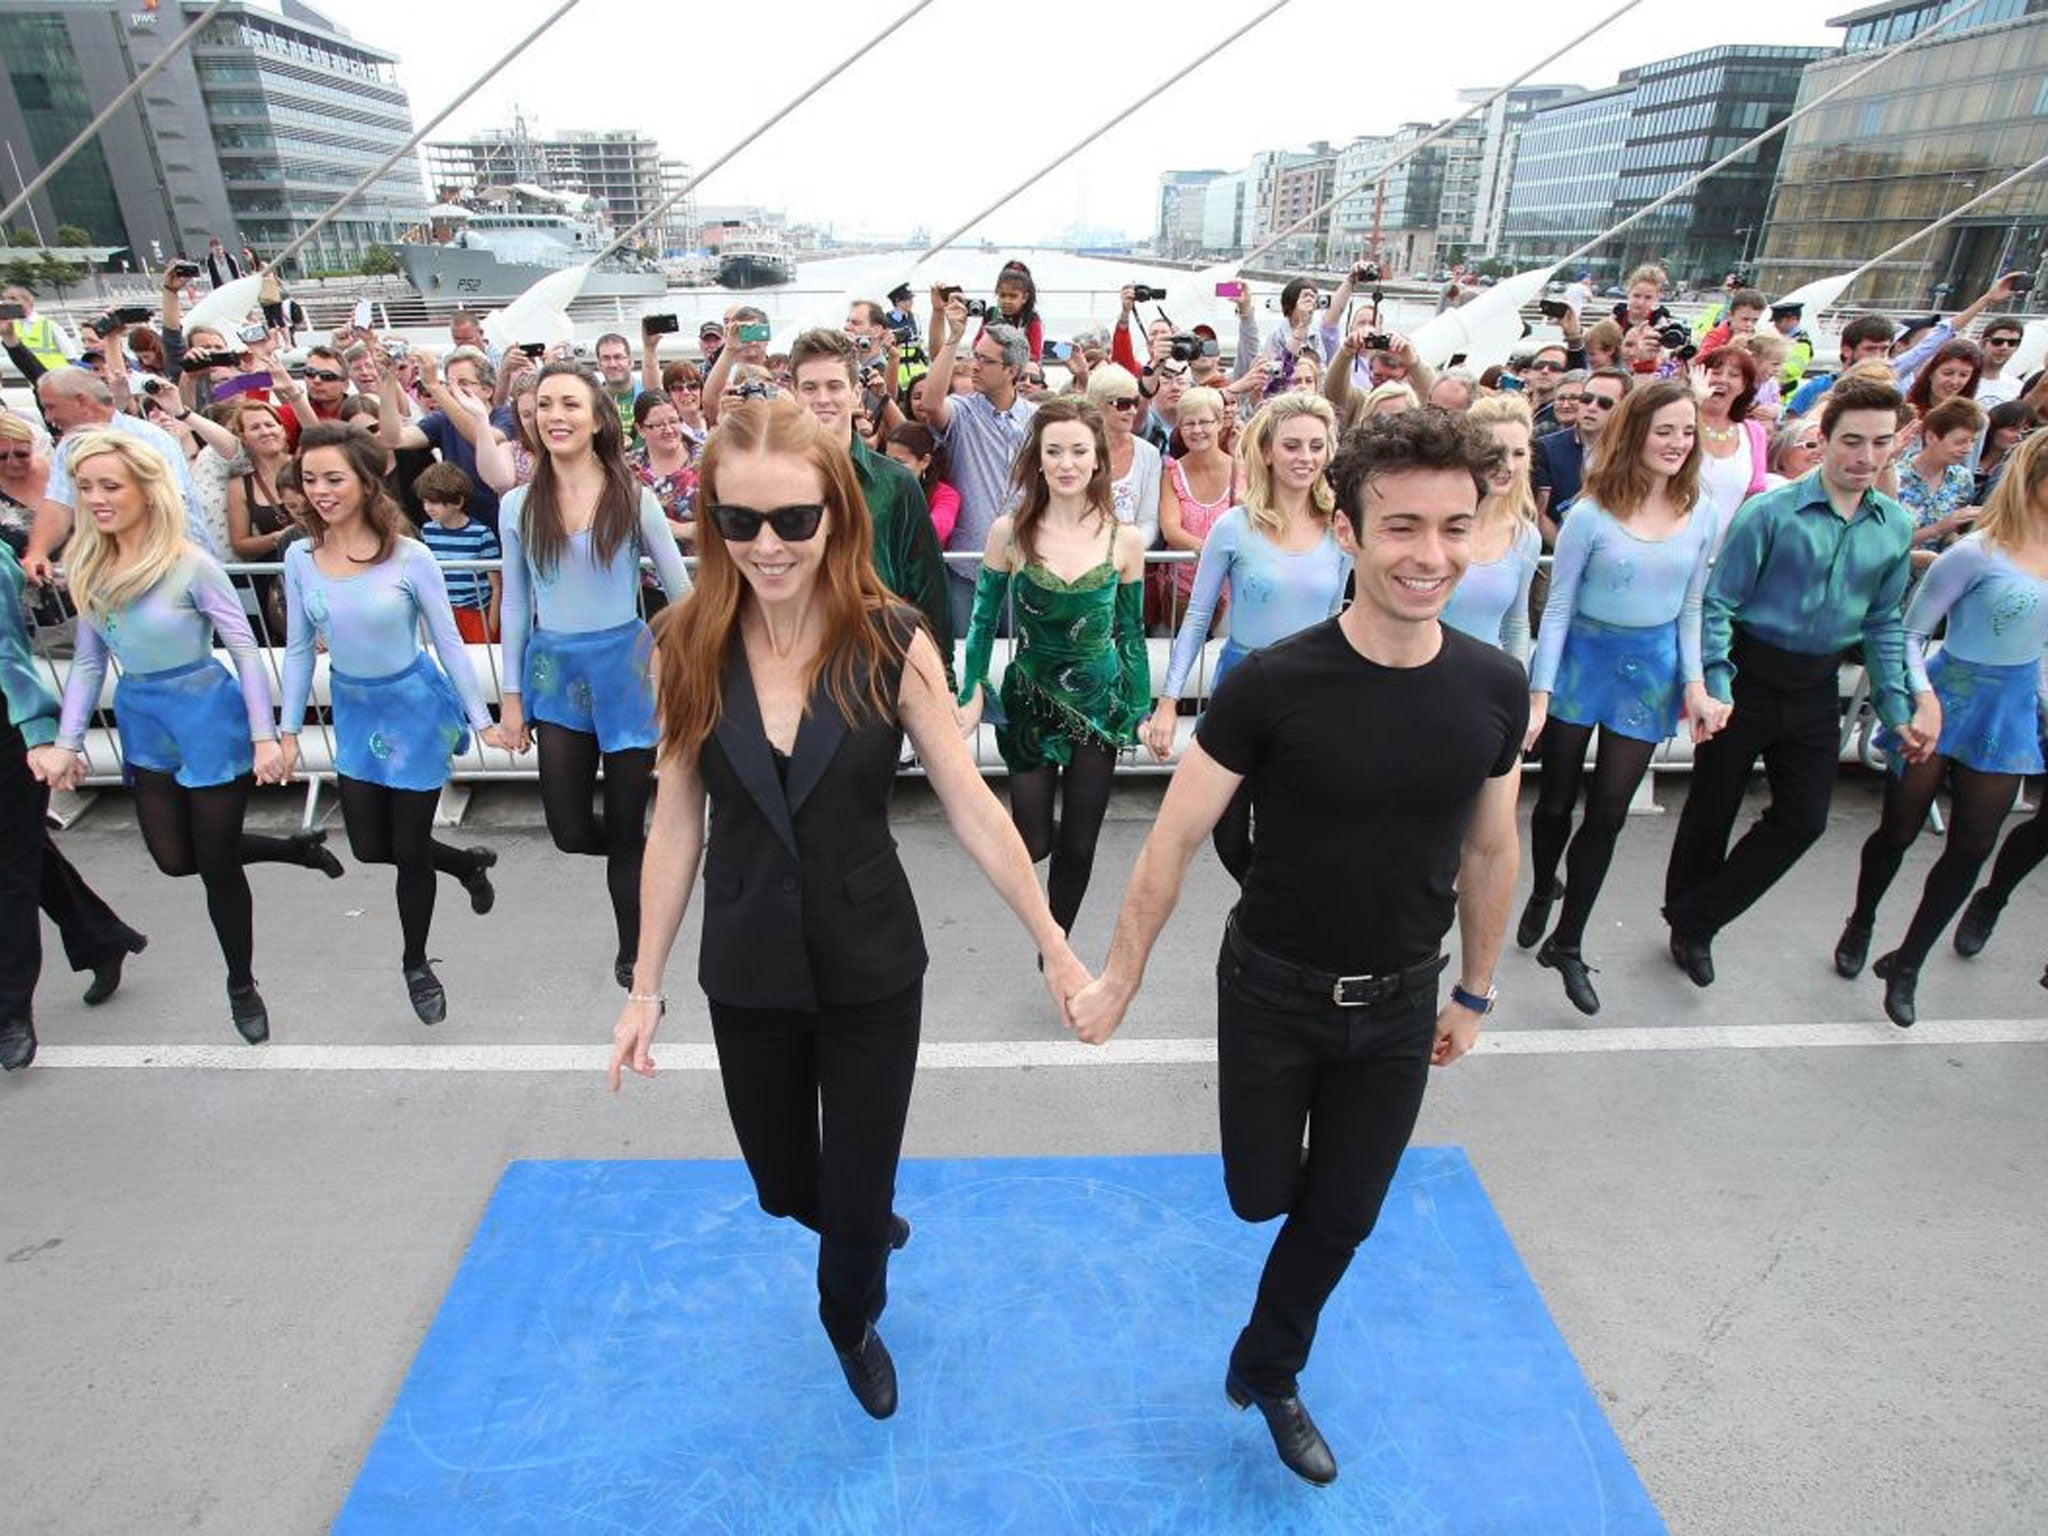 Jean Butler and Padraic Moyles lead the cast of Riverdance on Samuel Beckett Bridge during the world record attempt for the longest line of Irish dancers in Dublin